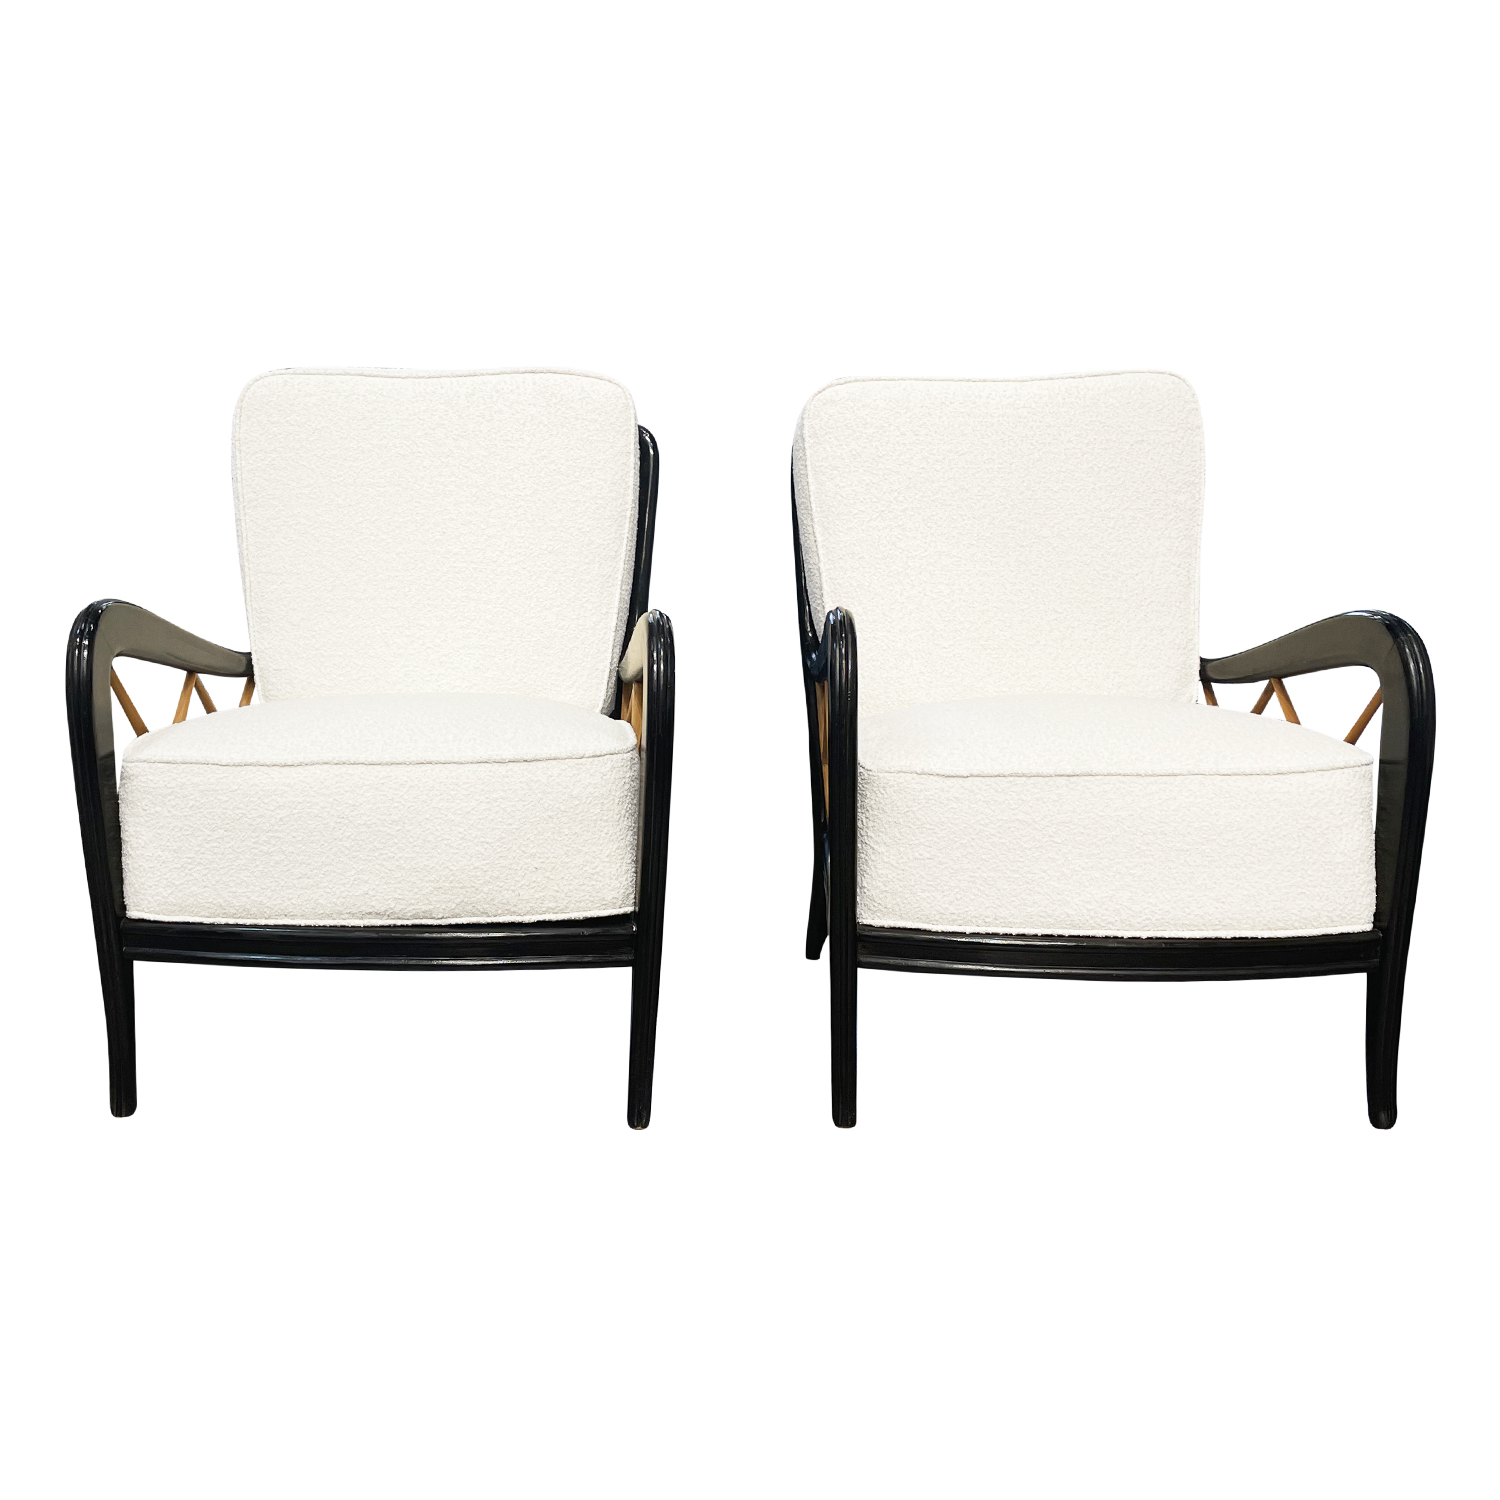 20th Century Italian Pair of Beech, Maplewood Lounge Chairs by Paolo Buffa